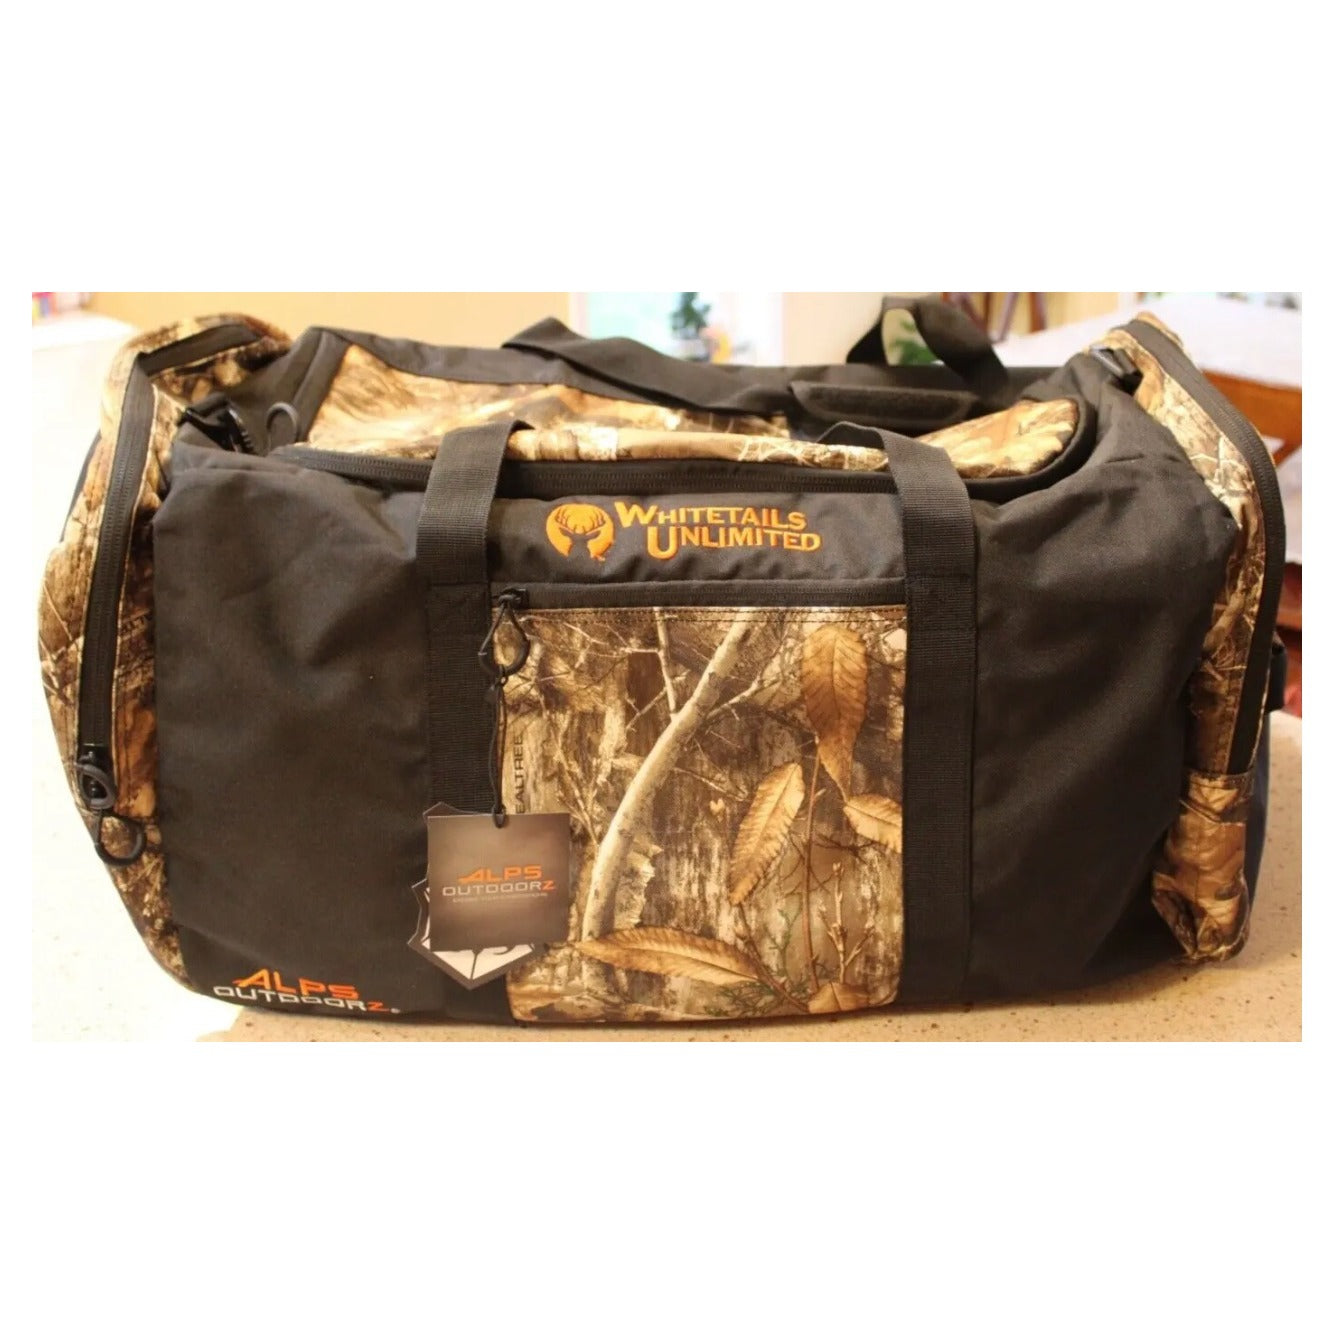 Alps Outdoorz Whitetails Unlimted WTU Duffle Bag NEW! Realtree Camo